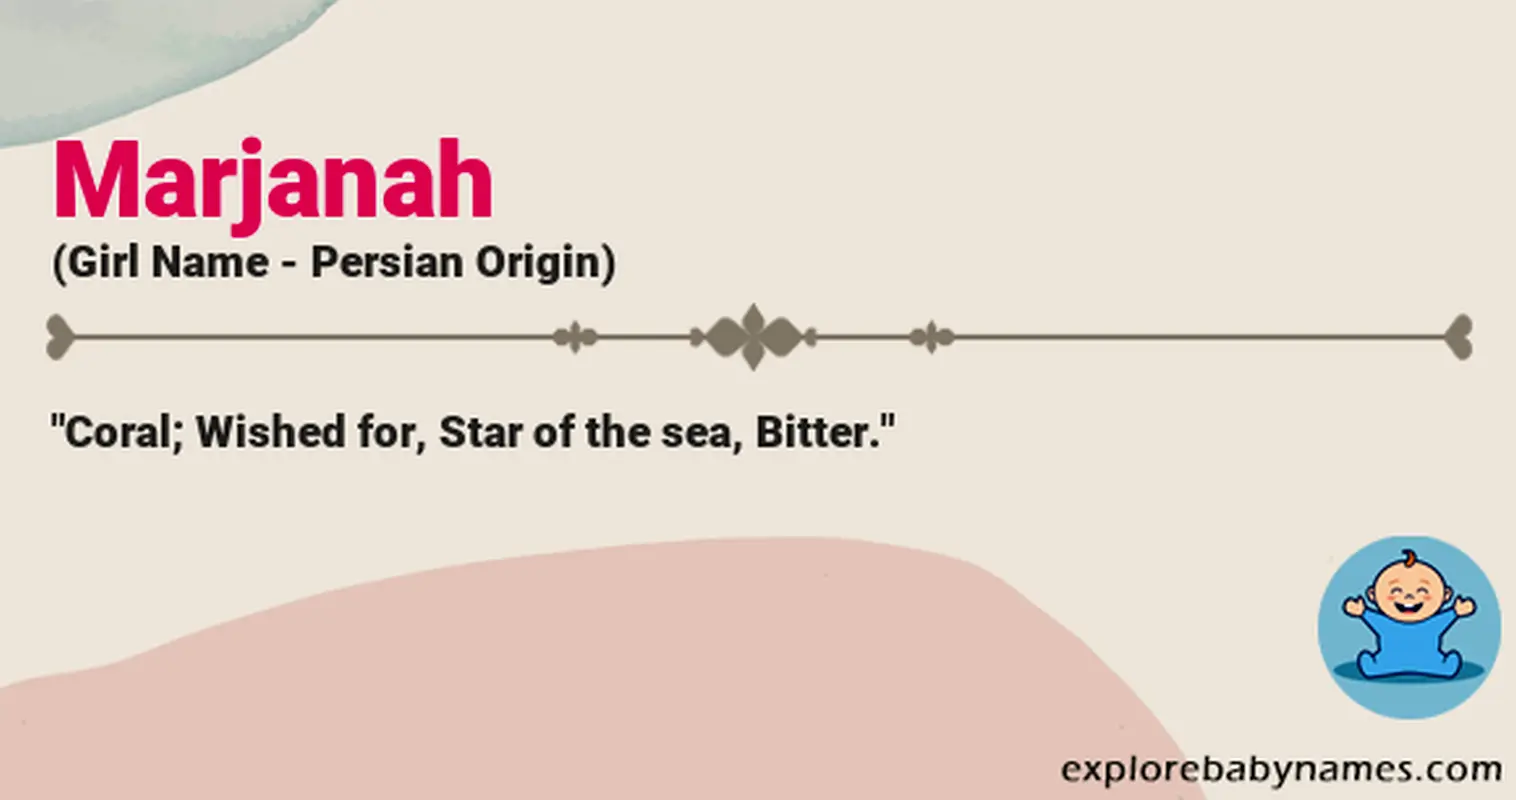 Meaning of Marjanah